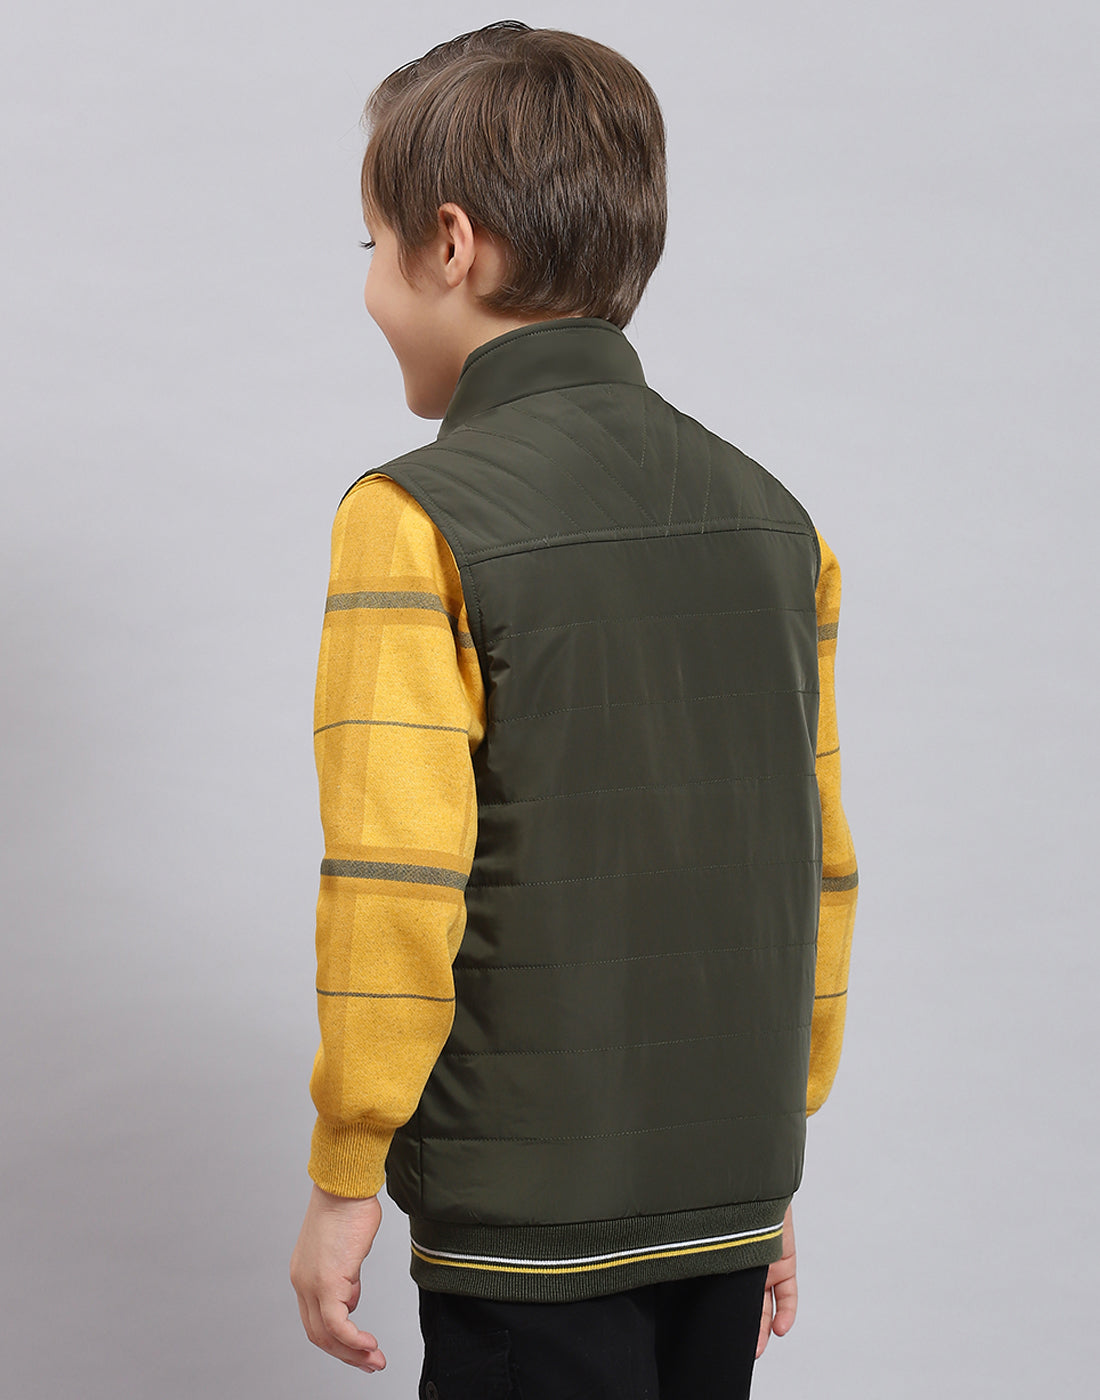 Boys Olive Solid Stand Collar Sleeveless Boys Jacket